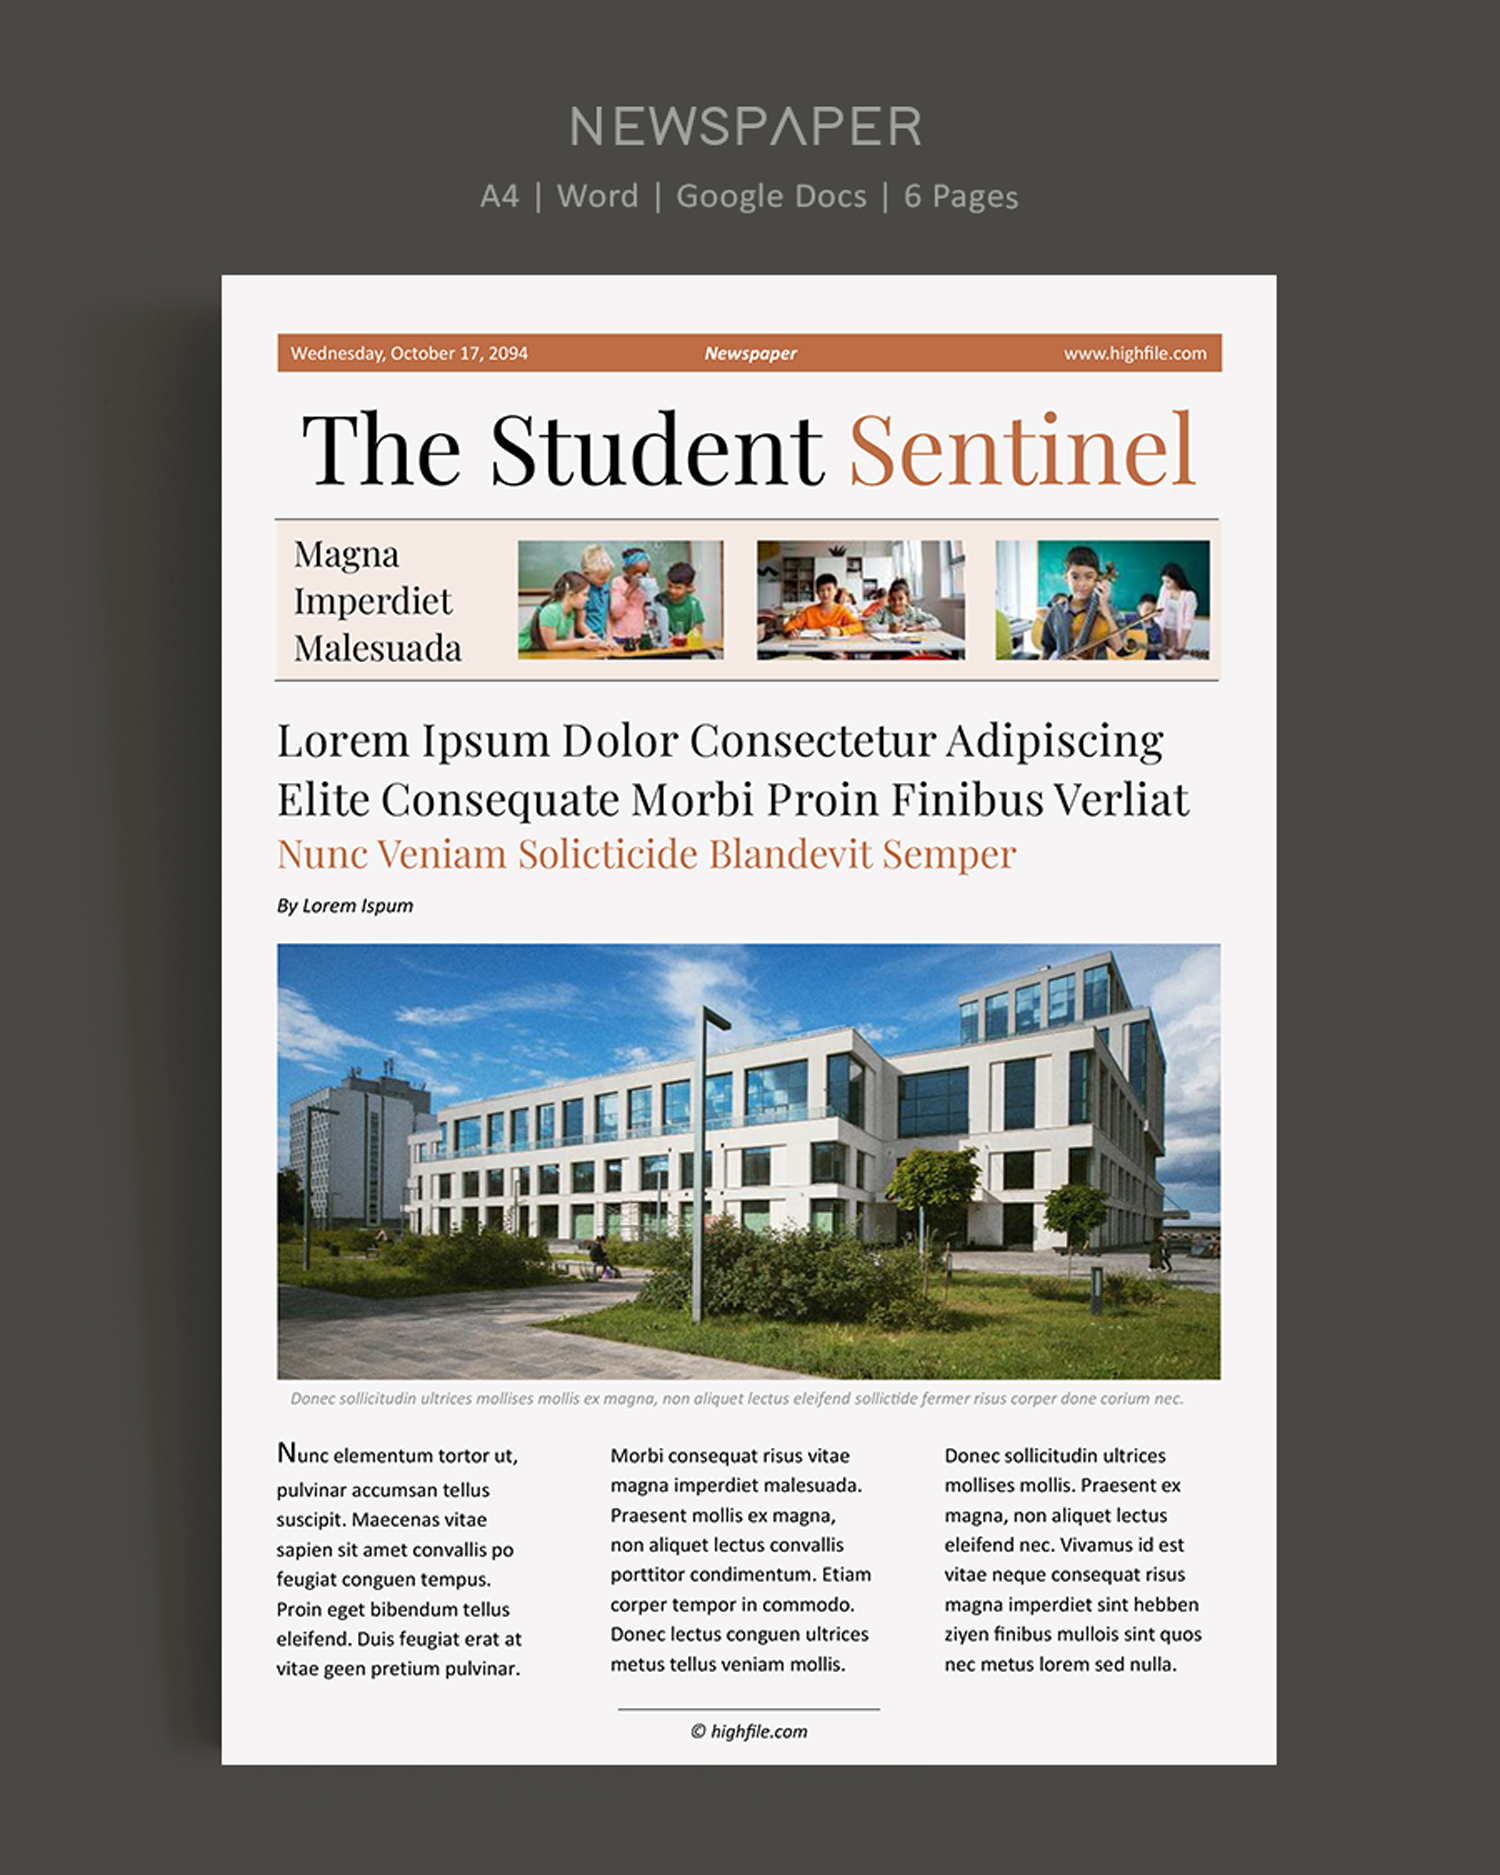 Minimal Newspaper Article Template for Students - Word, Google Docs